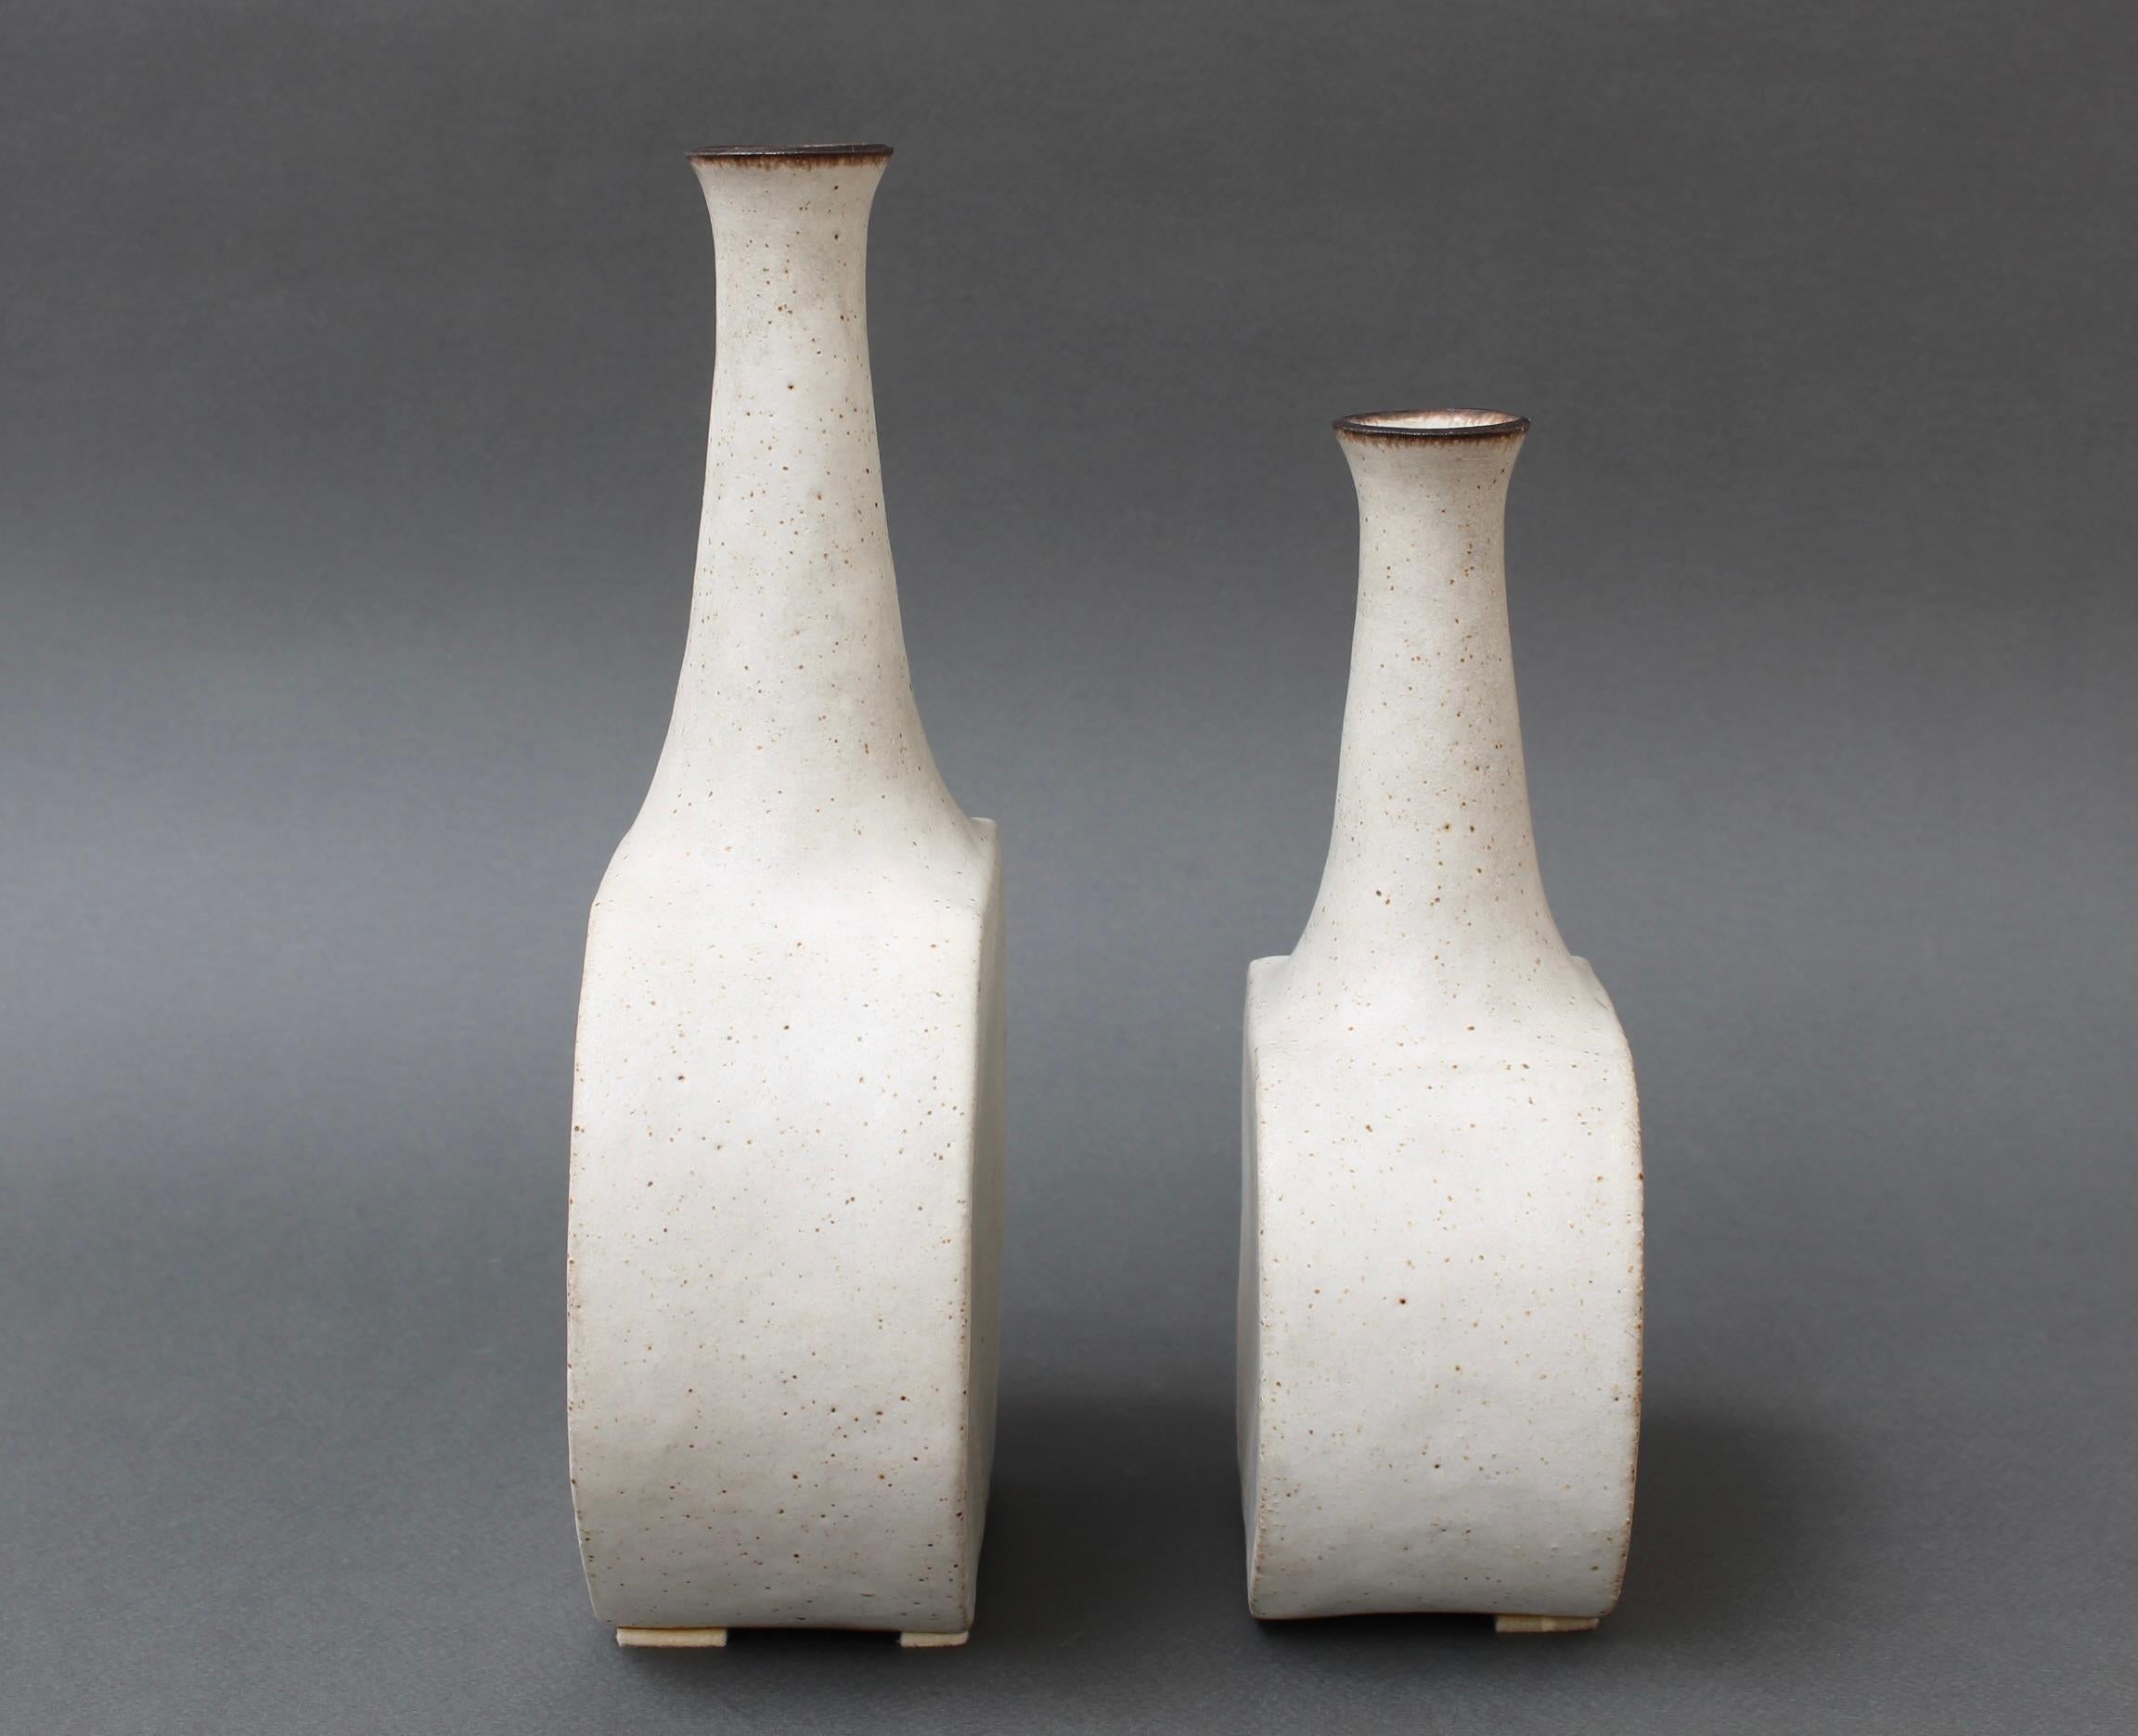 Pair of Italian ceramic bottles with chalk-white surface and lightly chocolate brown highlights by ceramicist Bruno Gambone, circa 1980s. These graceful pieces are composed of elegantly narrow-openings united over a sensuously elliptical body. They